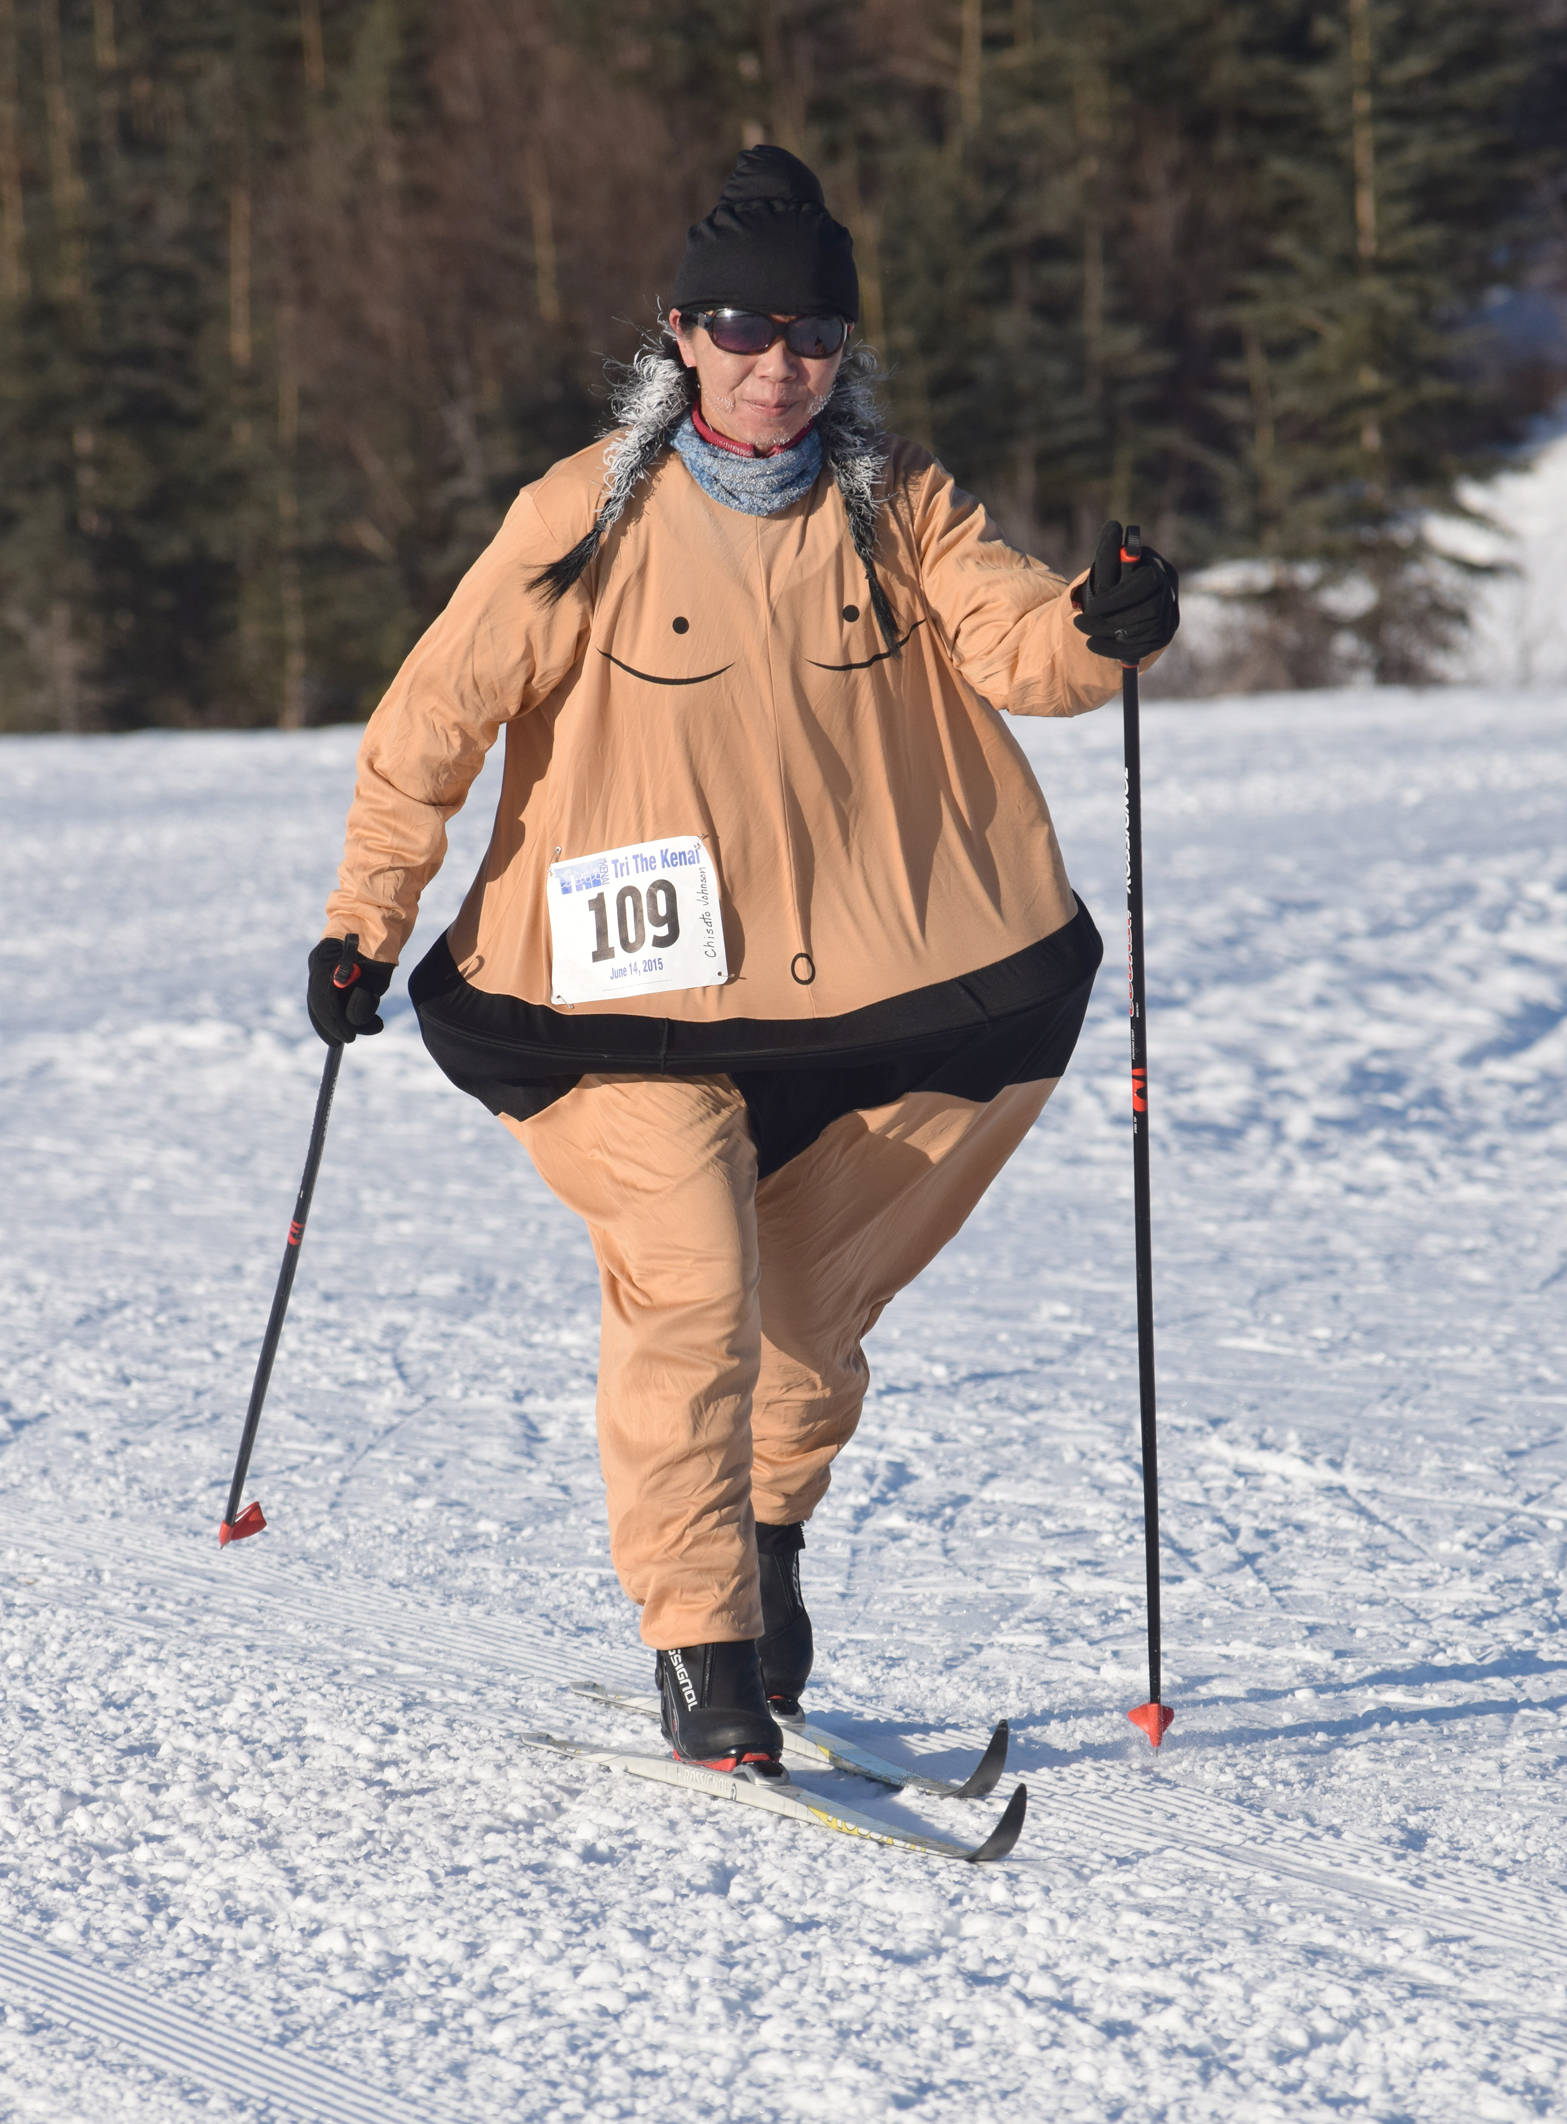 Chisato Johnson shows off the sumo costume that was voted best costume at the Ski For Women on Sunday, Feb. 4, 2018, at Tsalteshi Trails. (Photo by Jeff Helminiak/Peninsula Clarion)